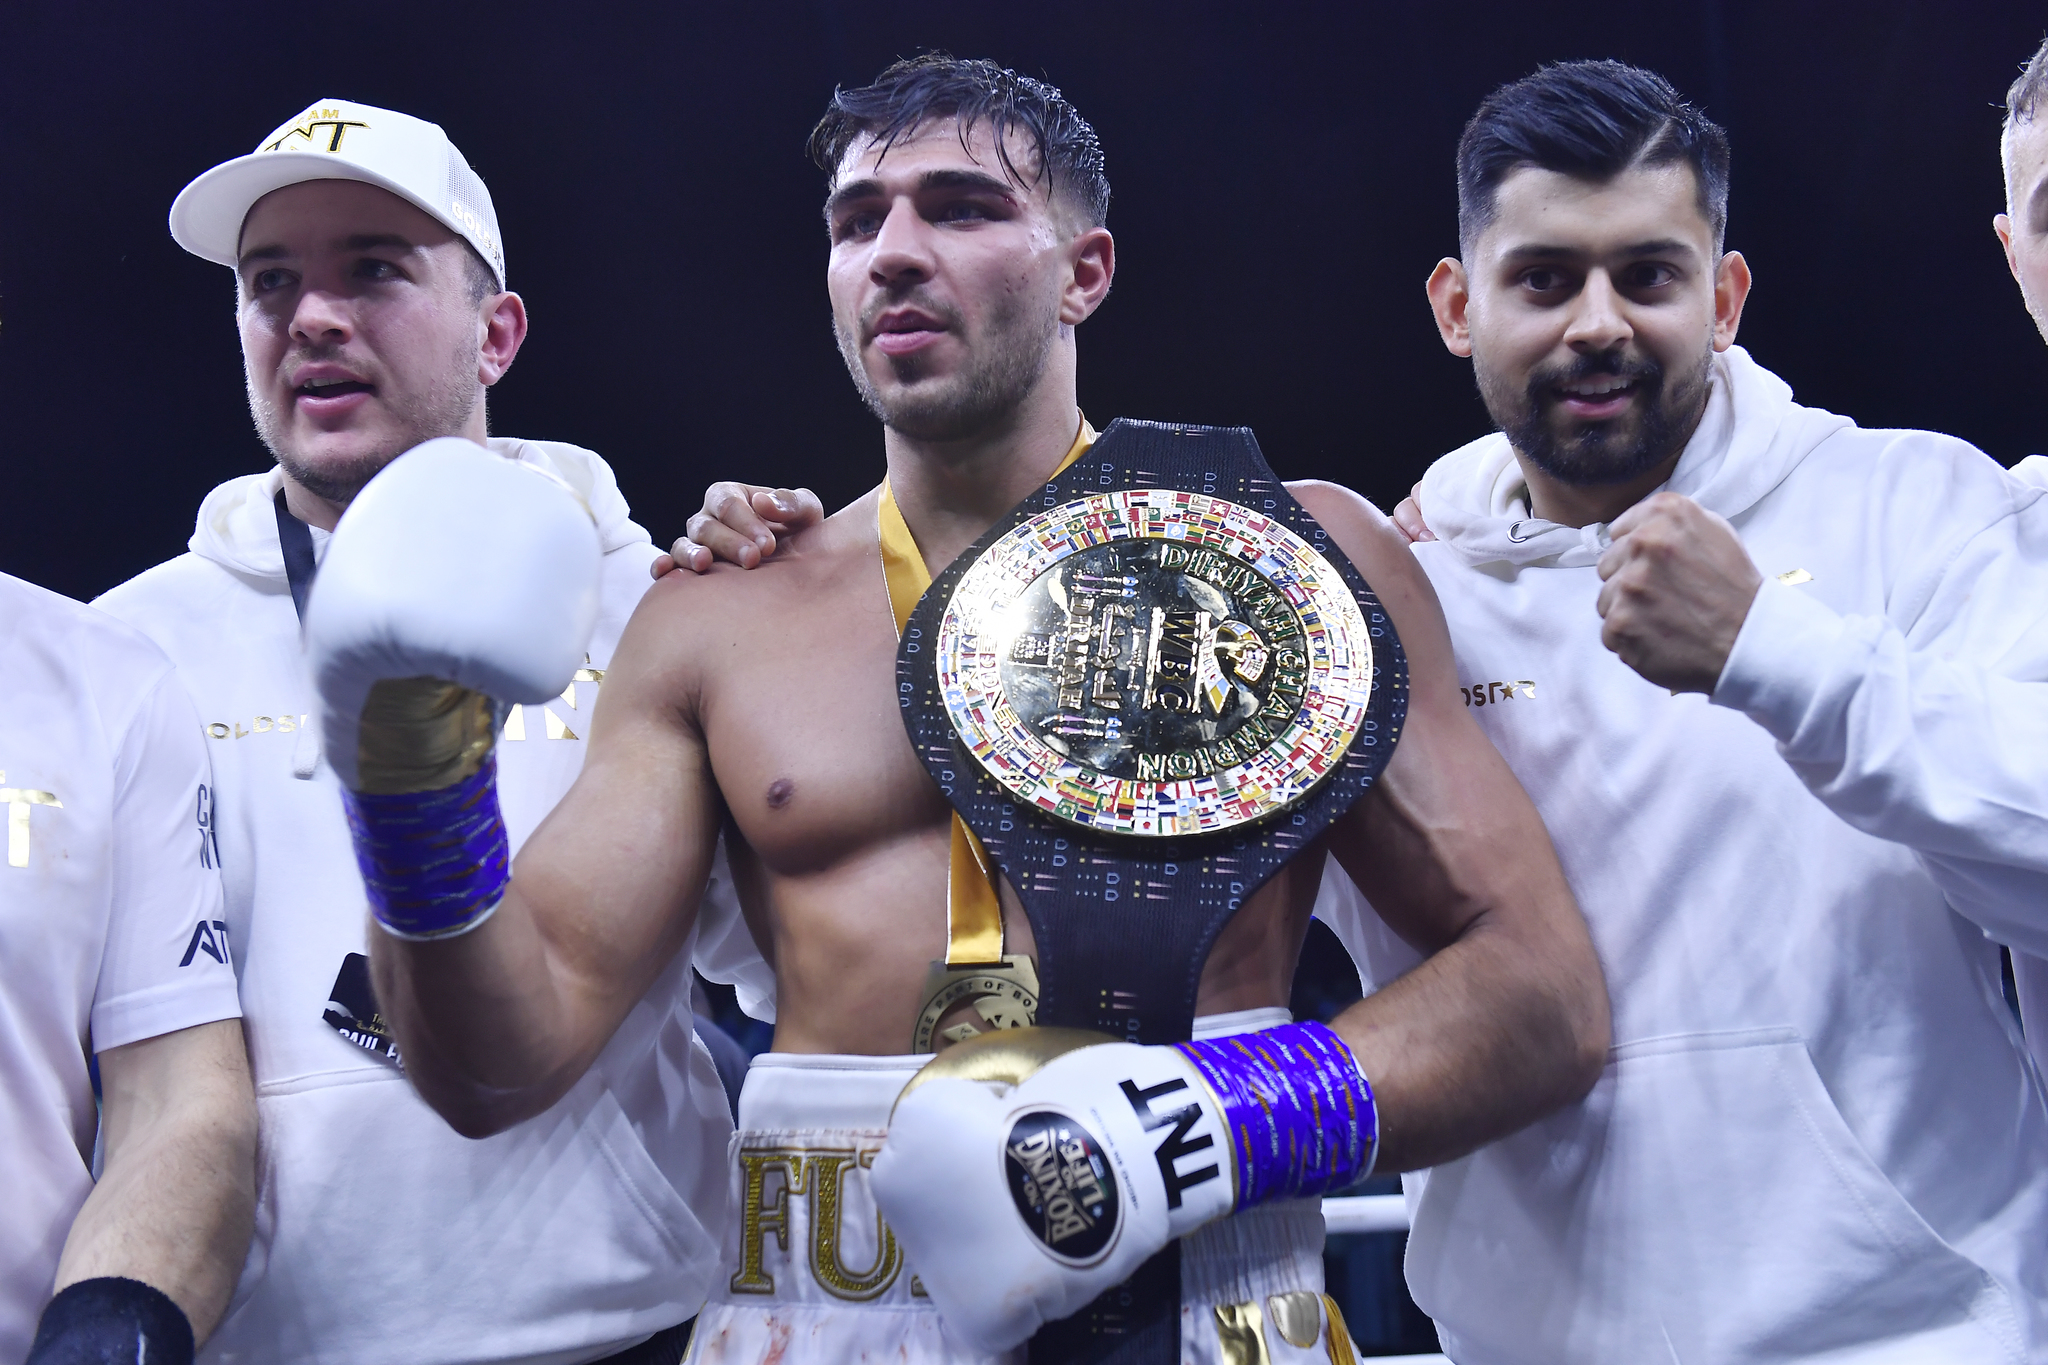 Tommy Fury makes good on his promise and will destroy his physique before next fight